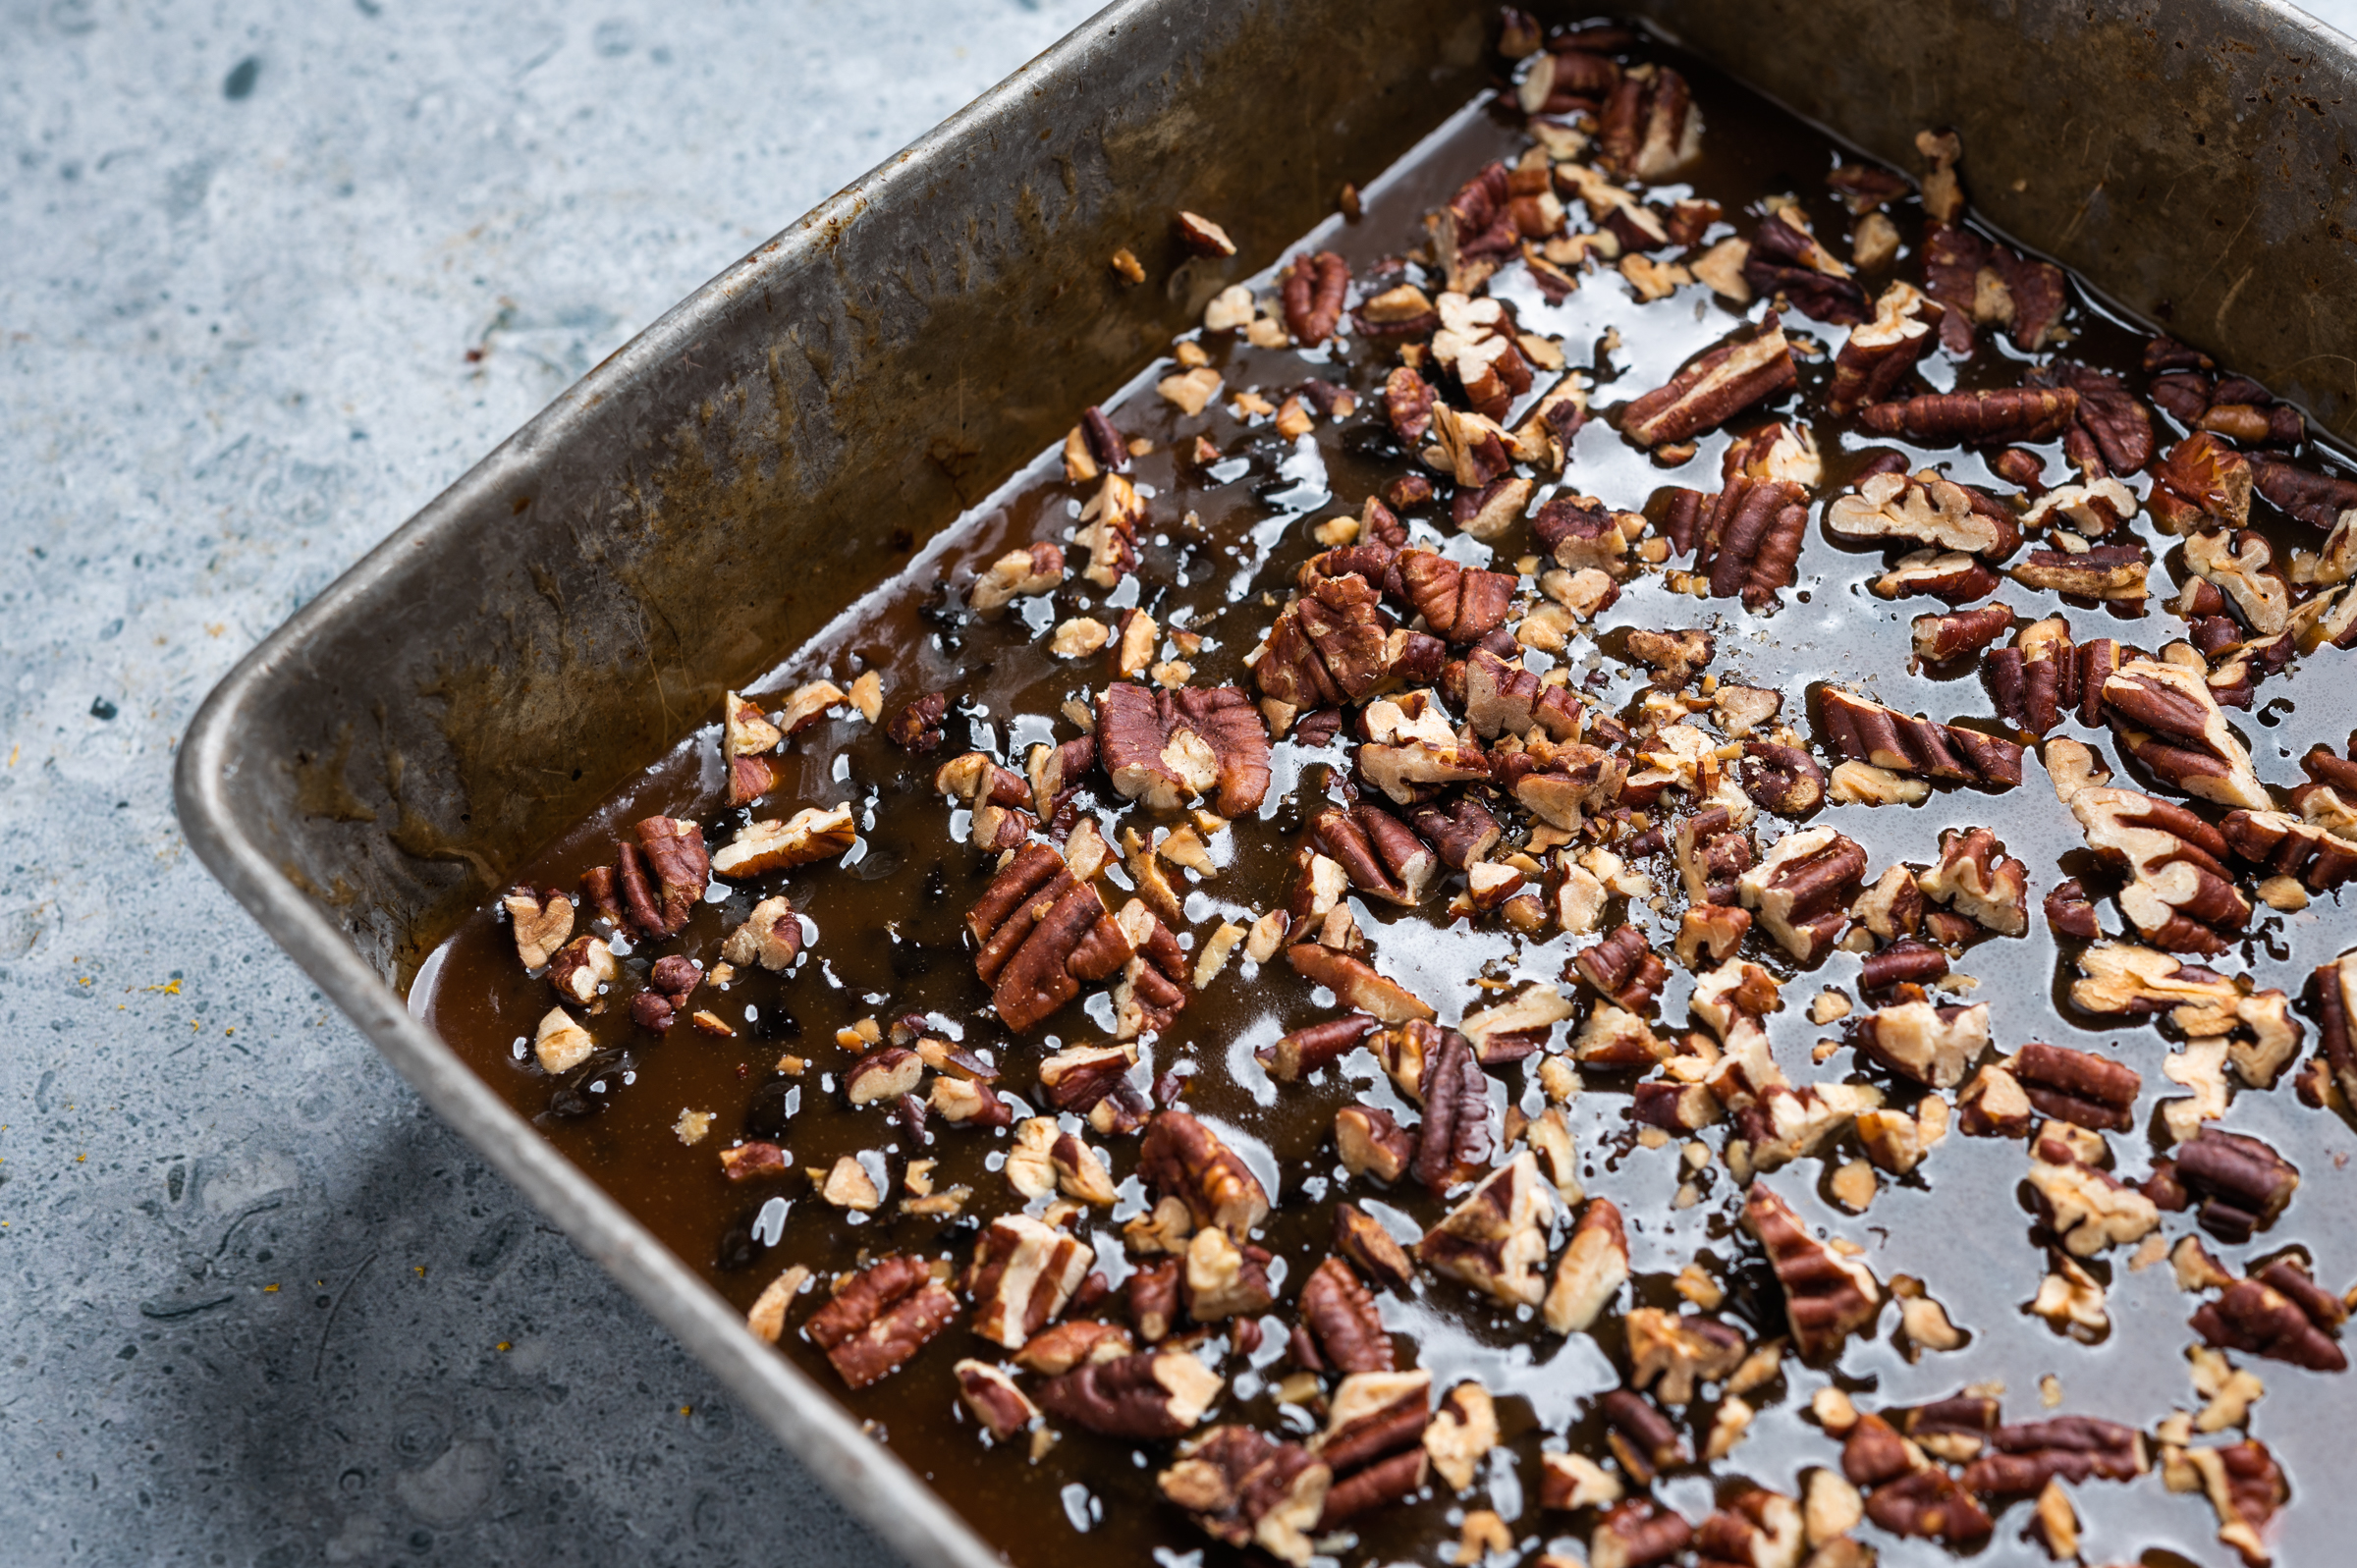 A layer of sticky topping with pecans coats the pan